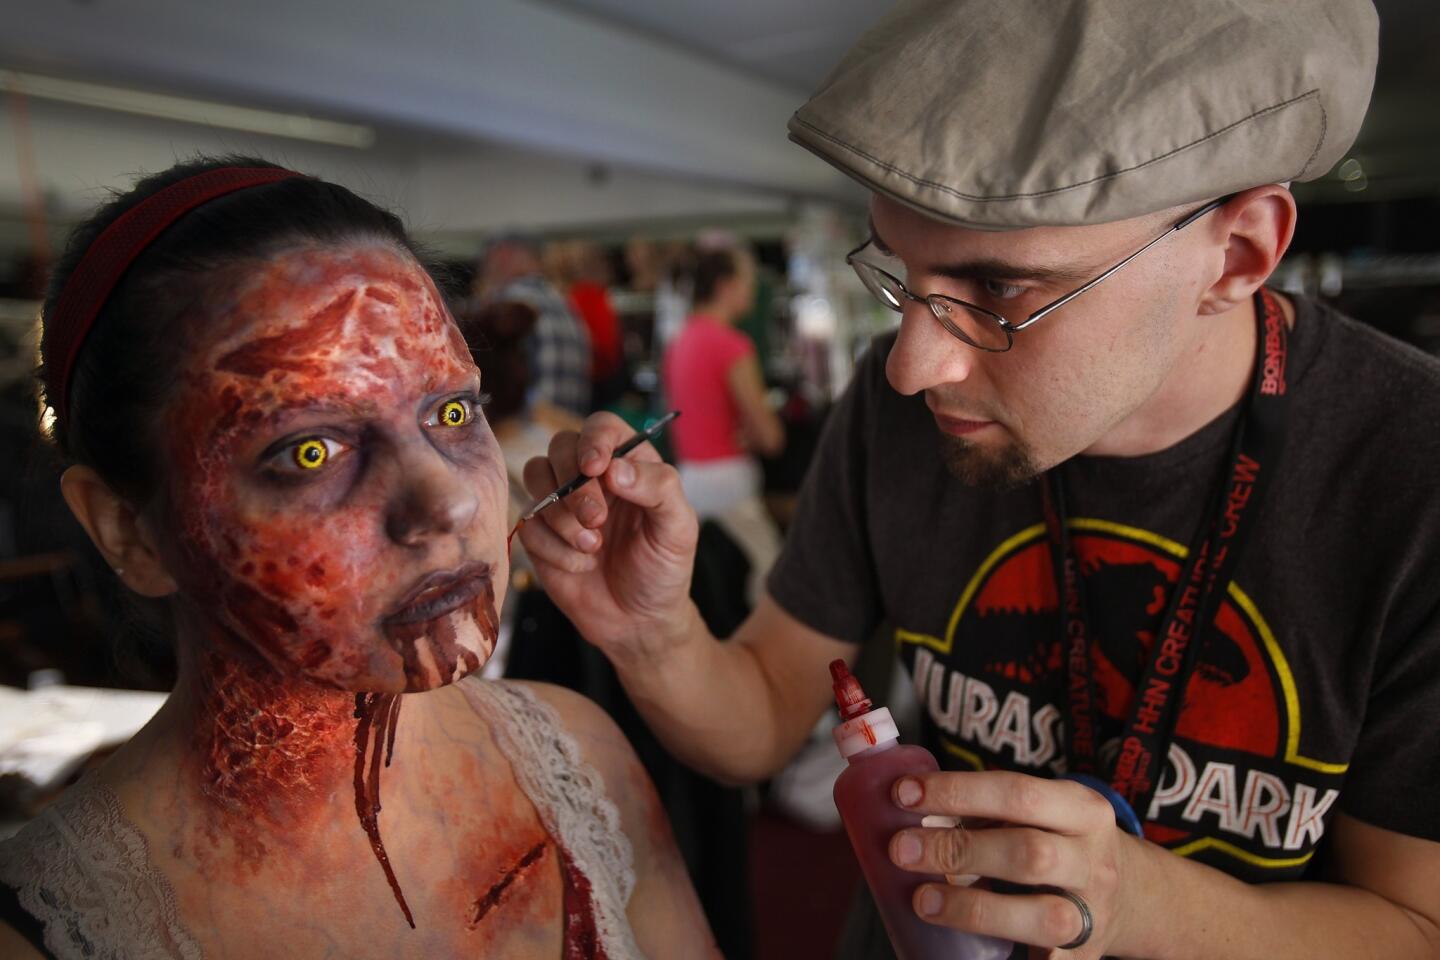 Makeup artist John Wrightson works to transform Aly Marianelli into "Forest Demon Mia" for Universal Studios' "Halloween Horror Nights." Hundreds of people are made up each night with various prosthetics, airbrushing and costumes before they attempt to scare people inside a variety of mazes.